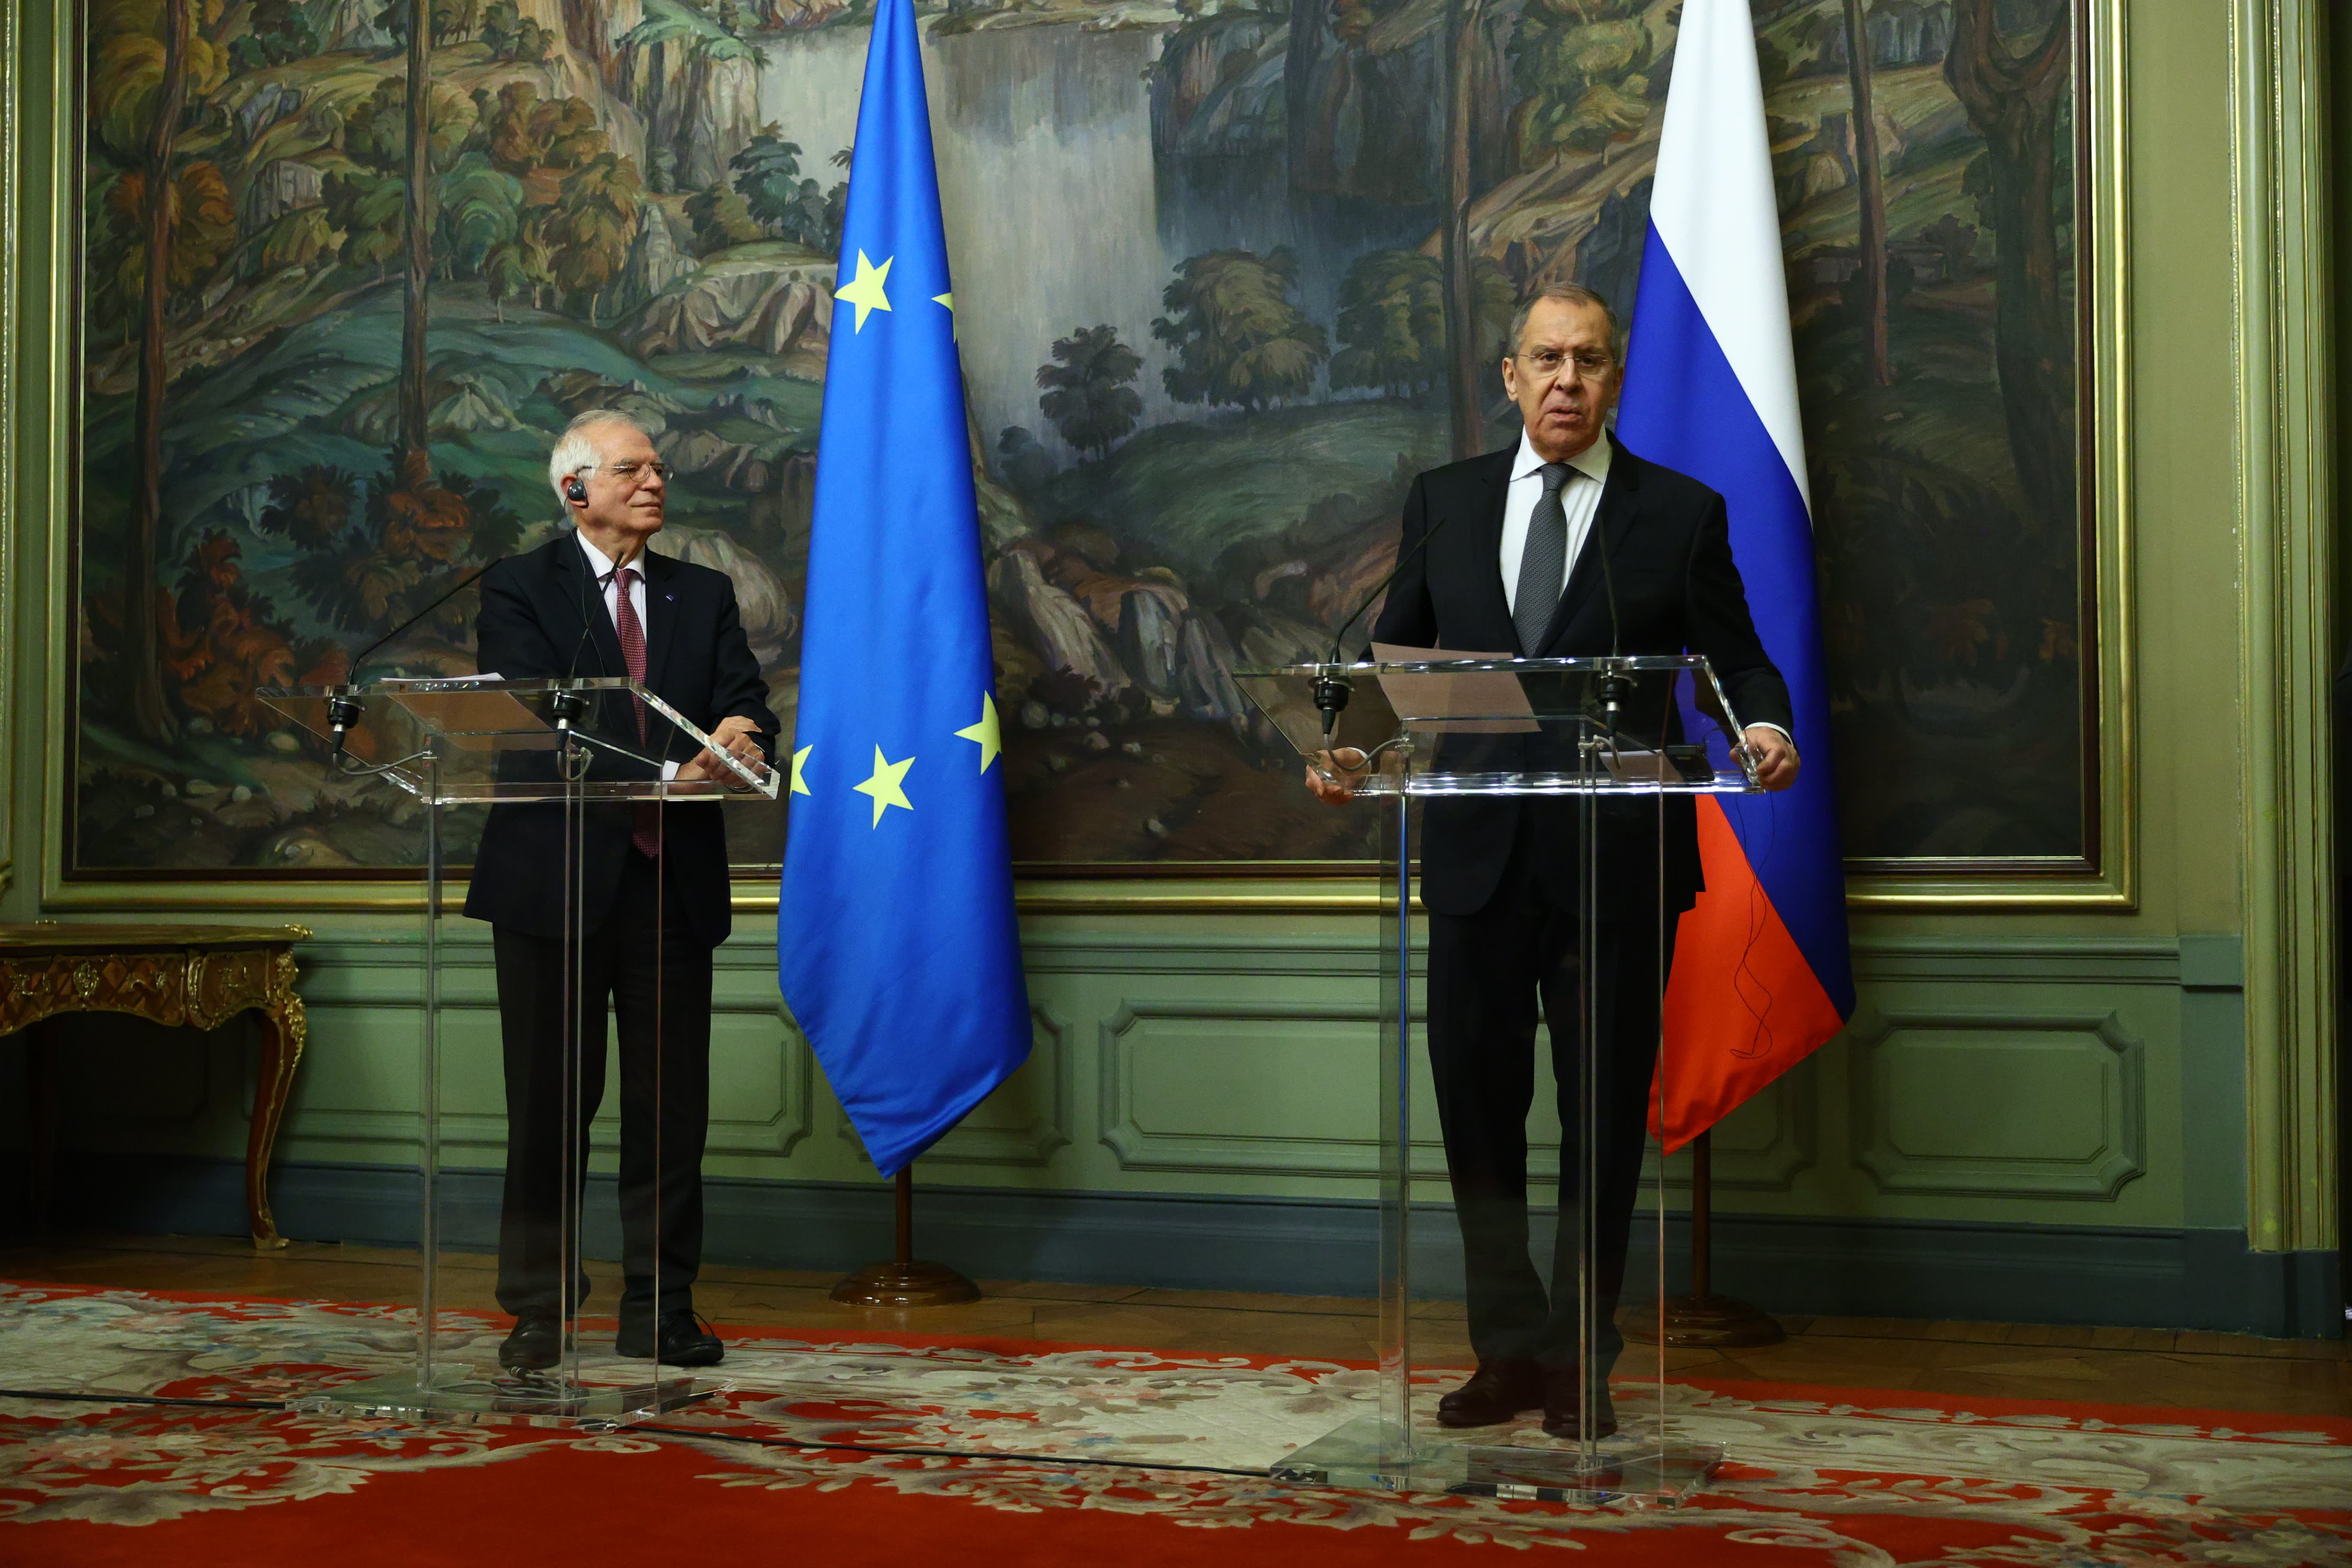 Tensions in Russia and the EU reached a new low after Lavrov’s comments in Moscow